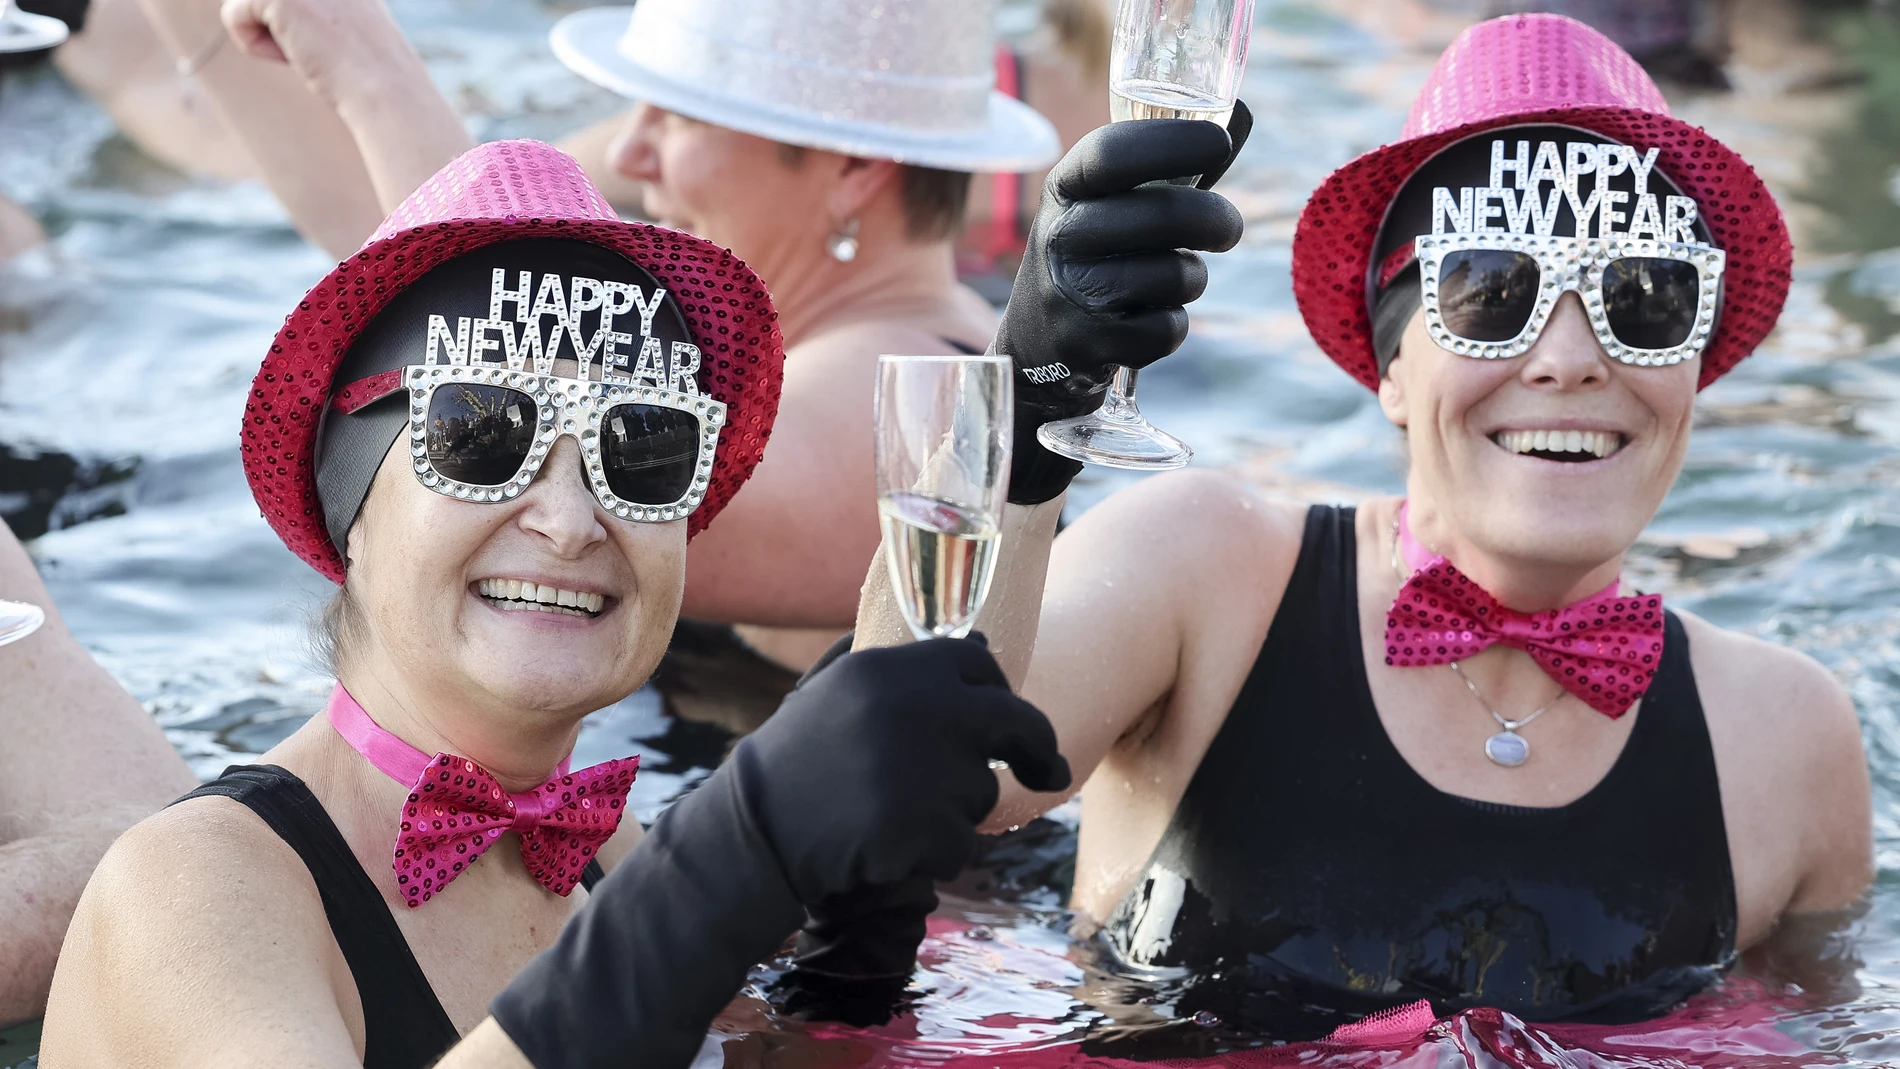 Geneva (Switzerland), 01/01/2023.- People toast with champagne while swimming in the cold water during the New Year's traditional swimming in the Lake of Geneva at the Bains des Paquis, in Geneva, Switzerland, 01 January 2023. (Suiza, Ginebra) EFE/EPA/SALVATORE DI NOLFI